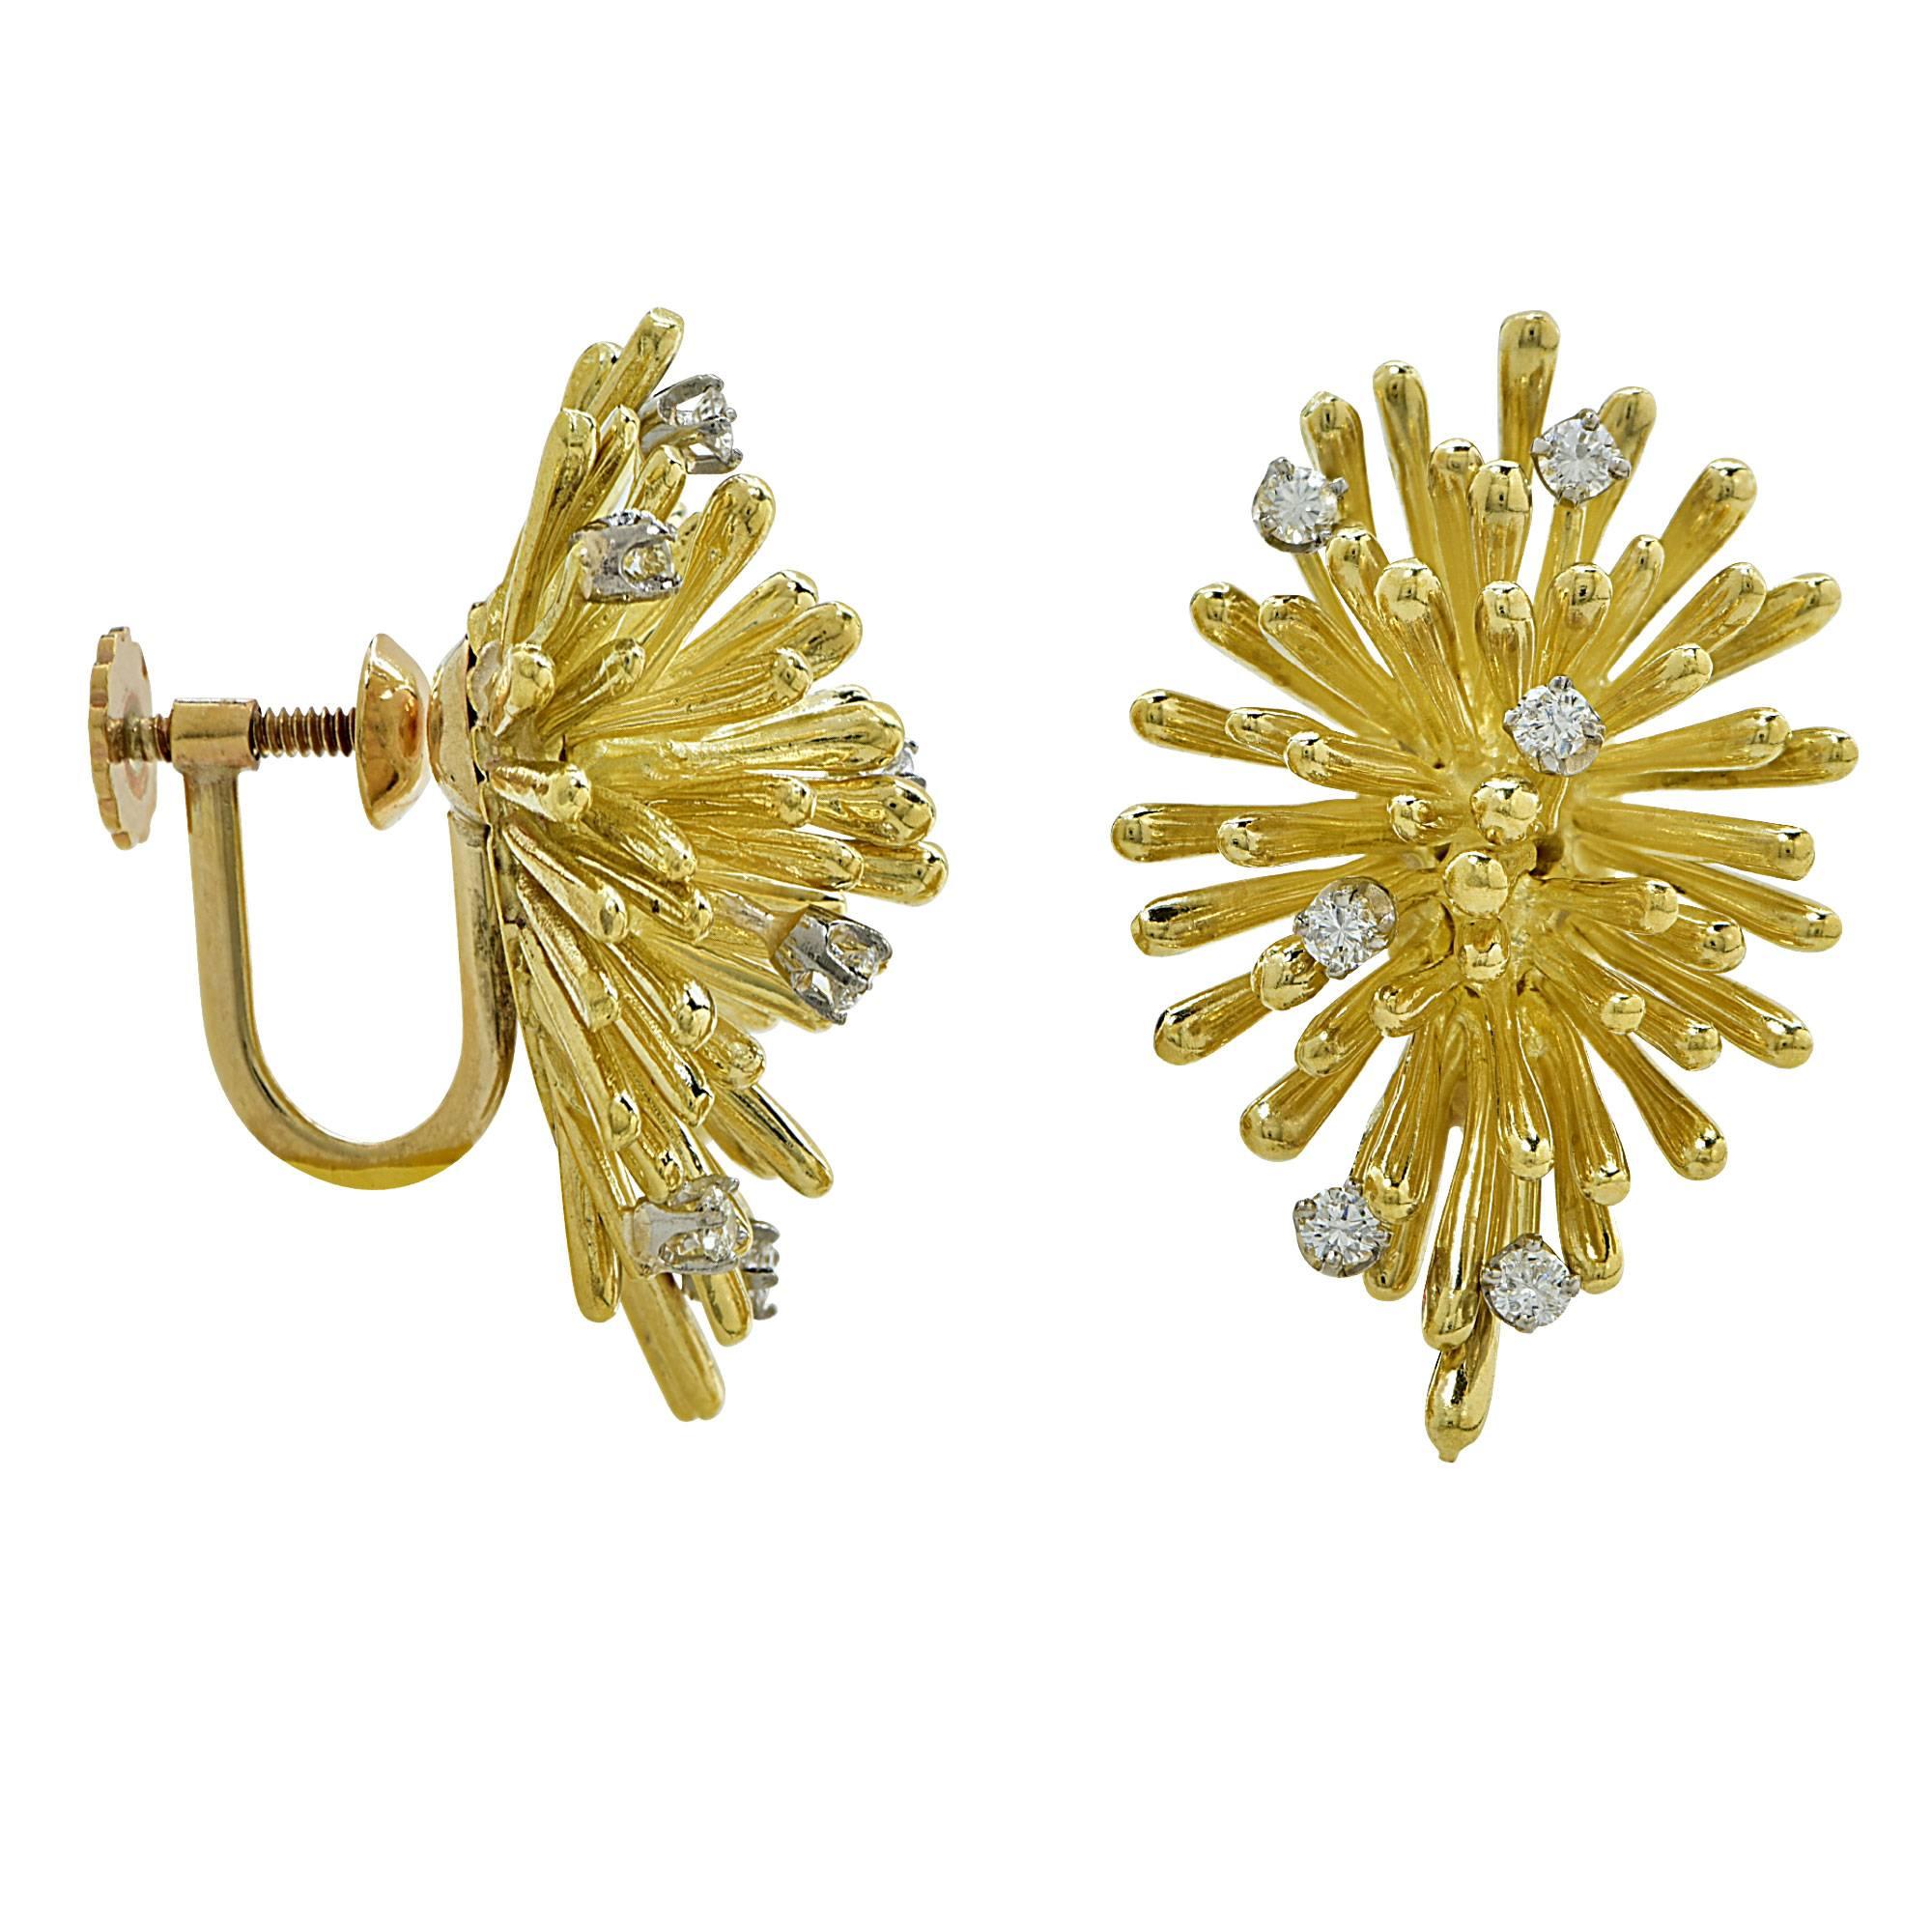 18k yellow gold earrings featuring 12 round brilliant cut diamonds weighing approximately .50cts total G color VS clarity.

Metal weight: 22.70 grams

These diamond earrings are accompanied by a retail appraisal performed by a GIA Graduate